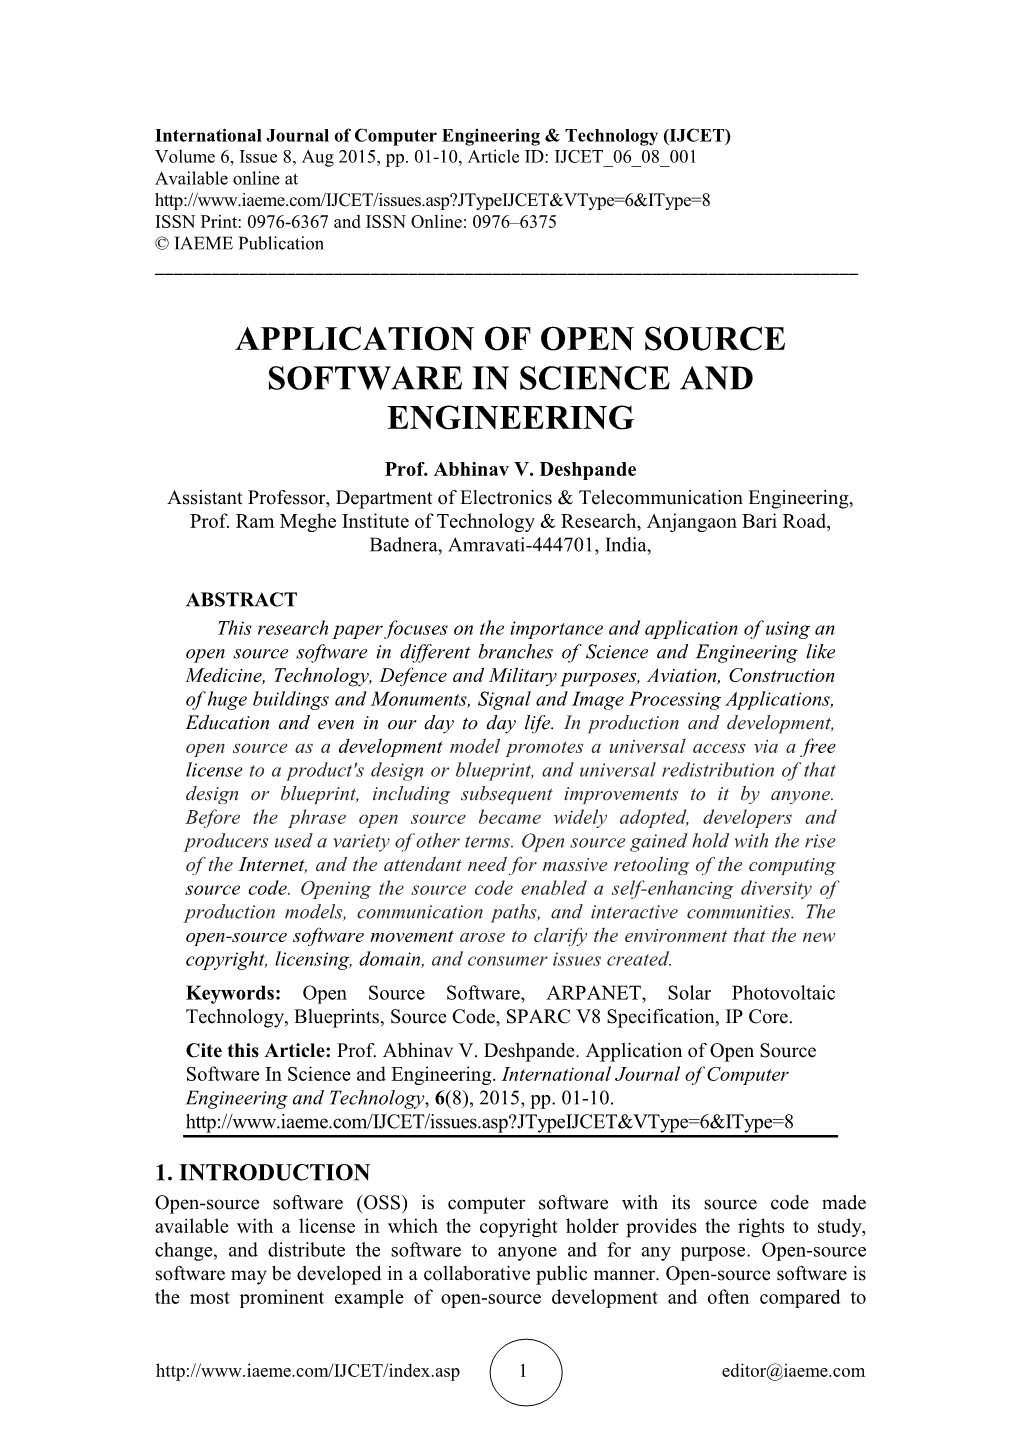 Application of Open Source Software in Science and Engineering